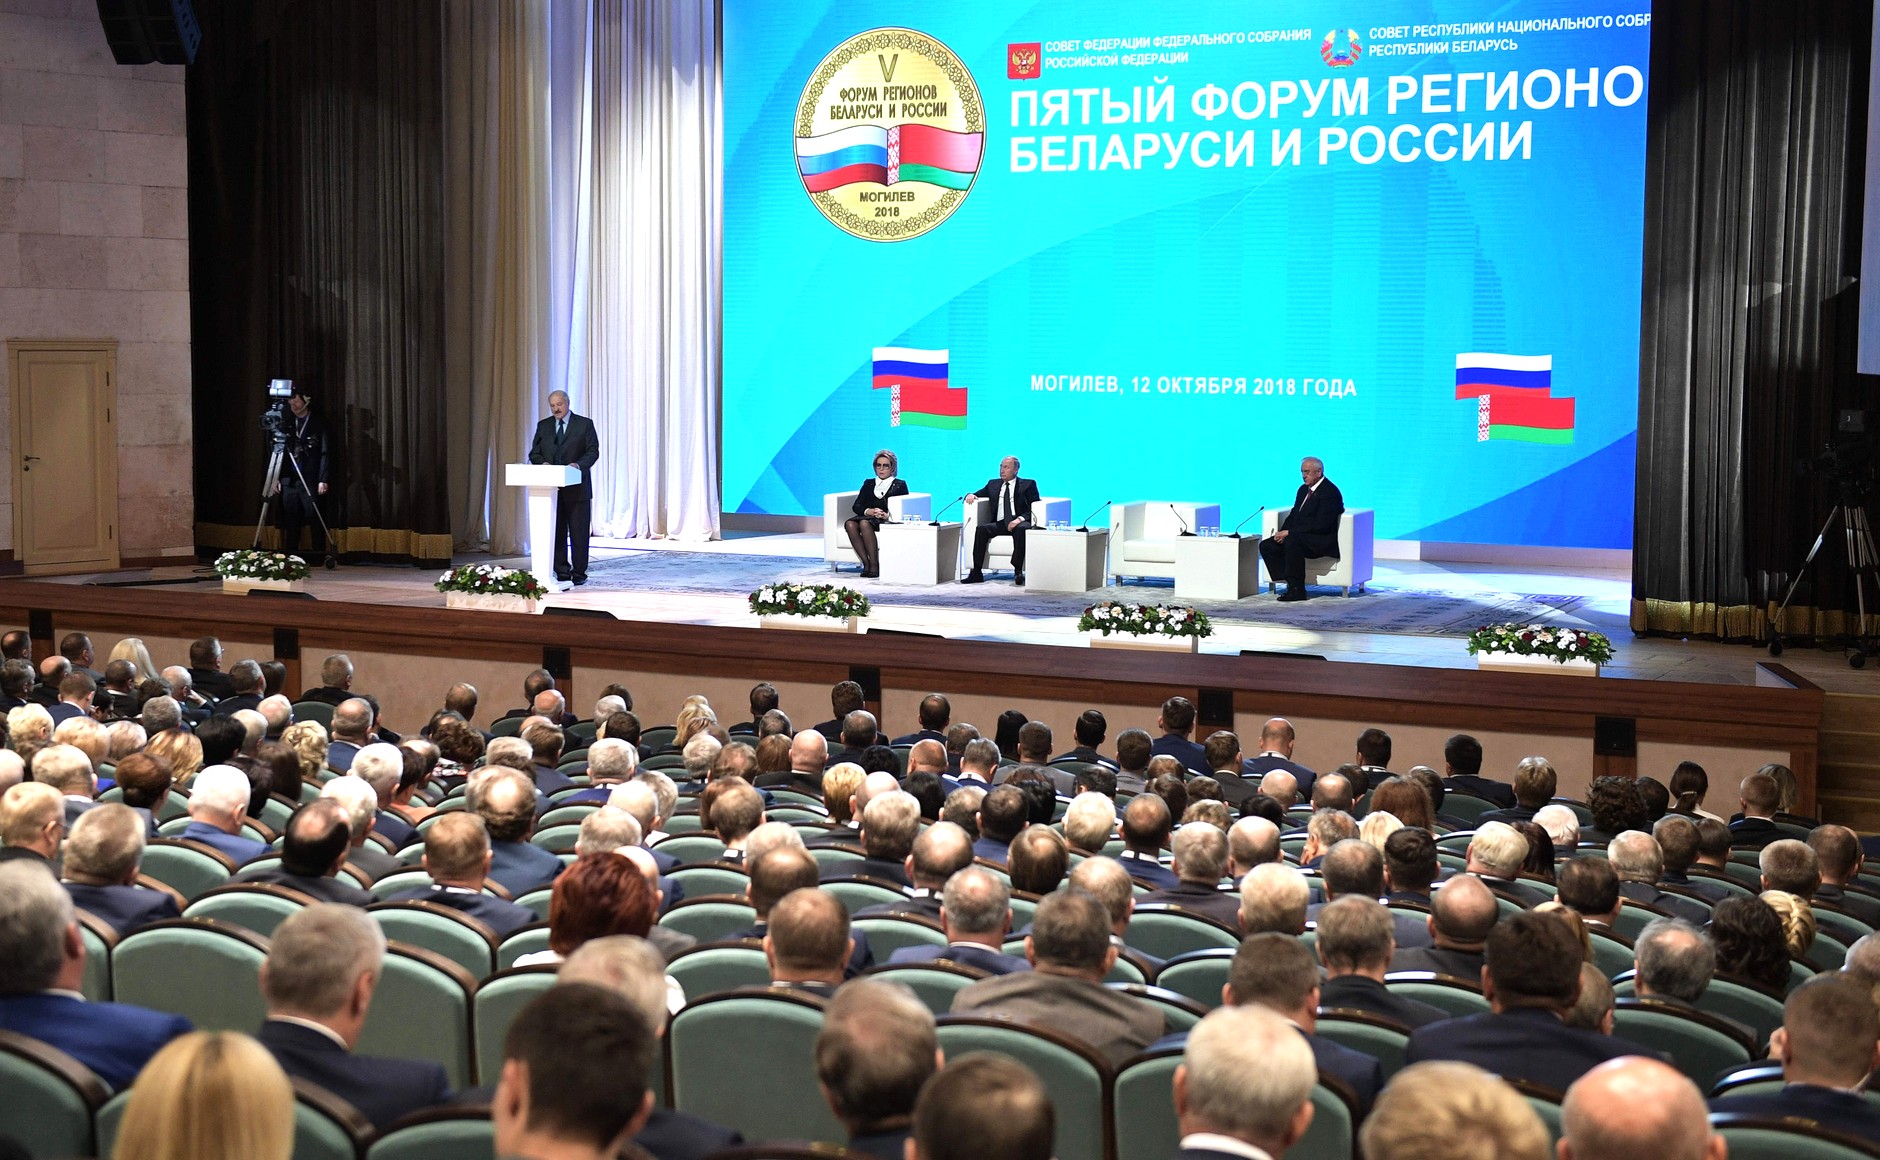 Belarus-Russia: Forum of the Regions and final agreements on mutual trade quotas for petrochemicals and foodstuffs